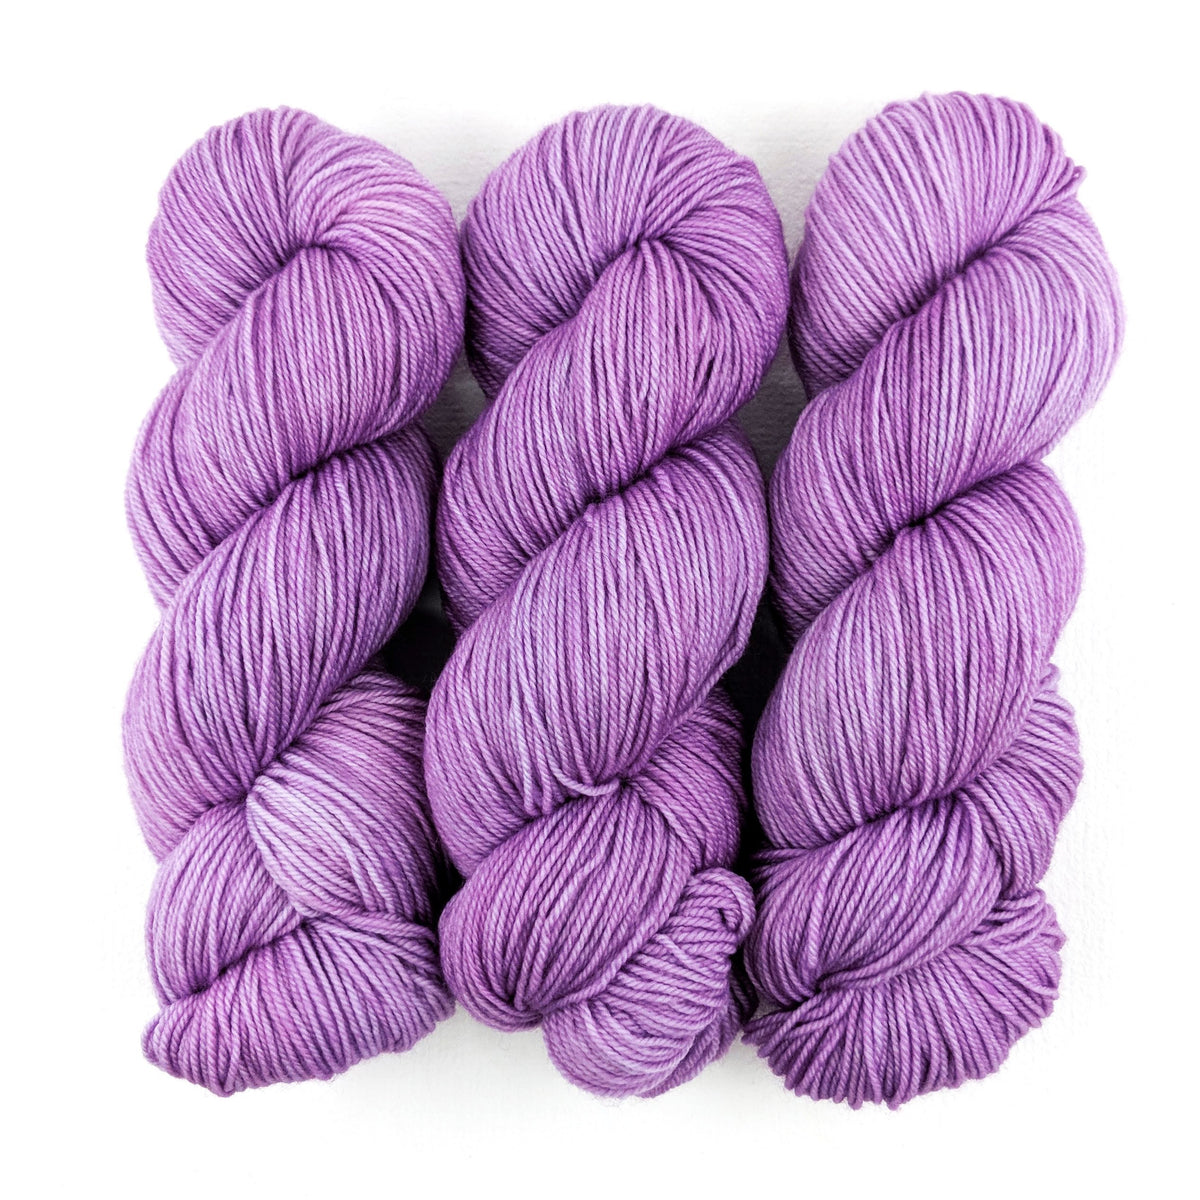 House Orchid - Merino DK / Light Worsted - Dyed Stock